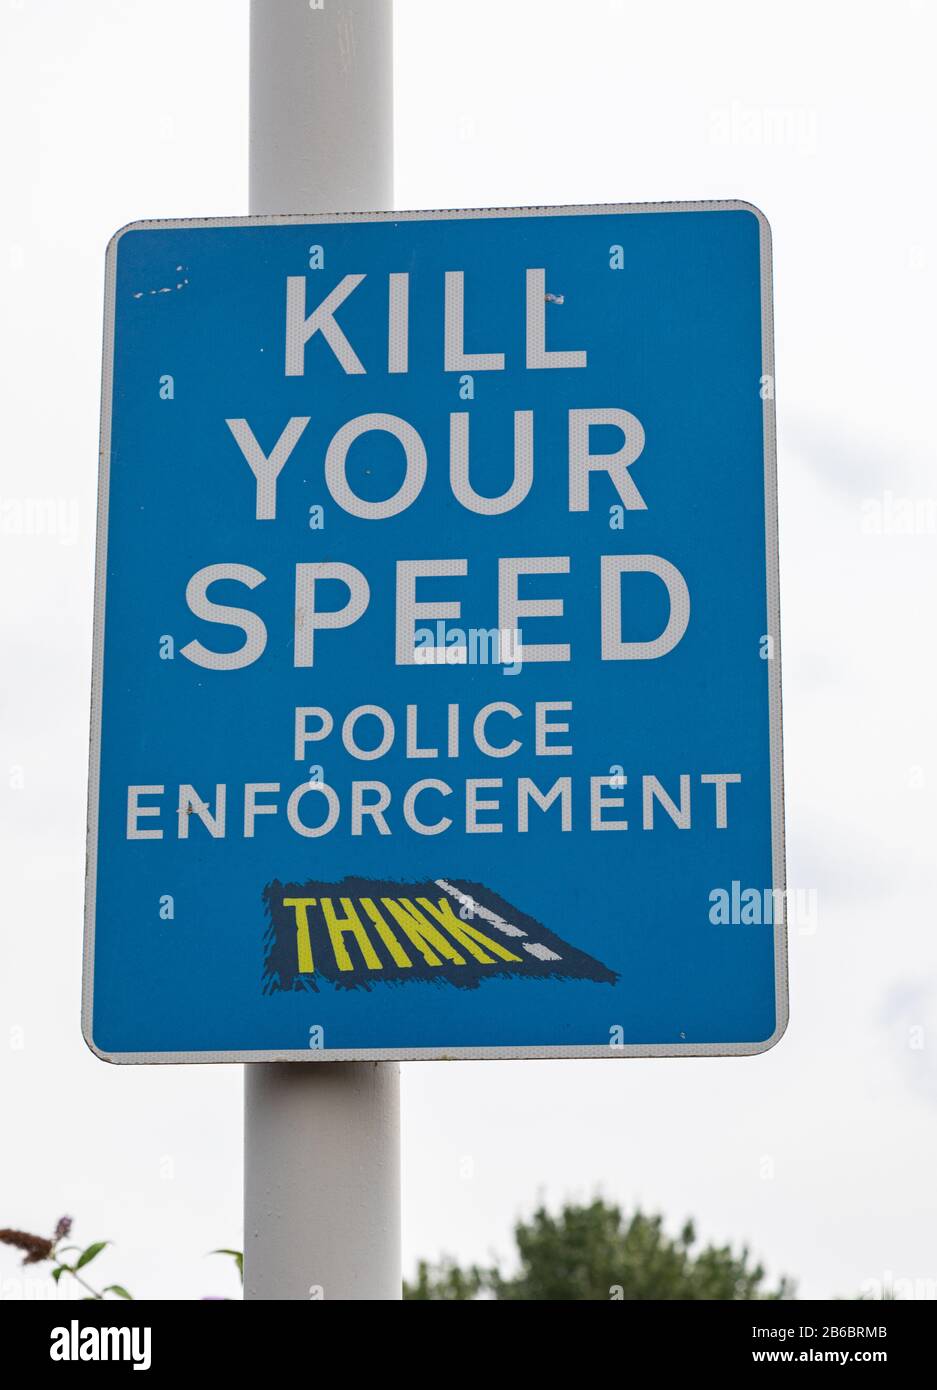 Kill your speed police enforcement sign in Wallasey Wirral August 2019 Stock Photo